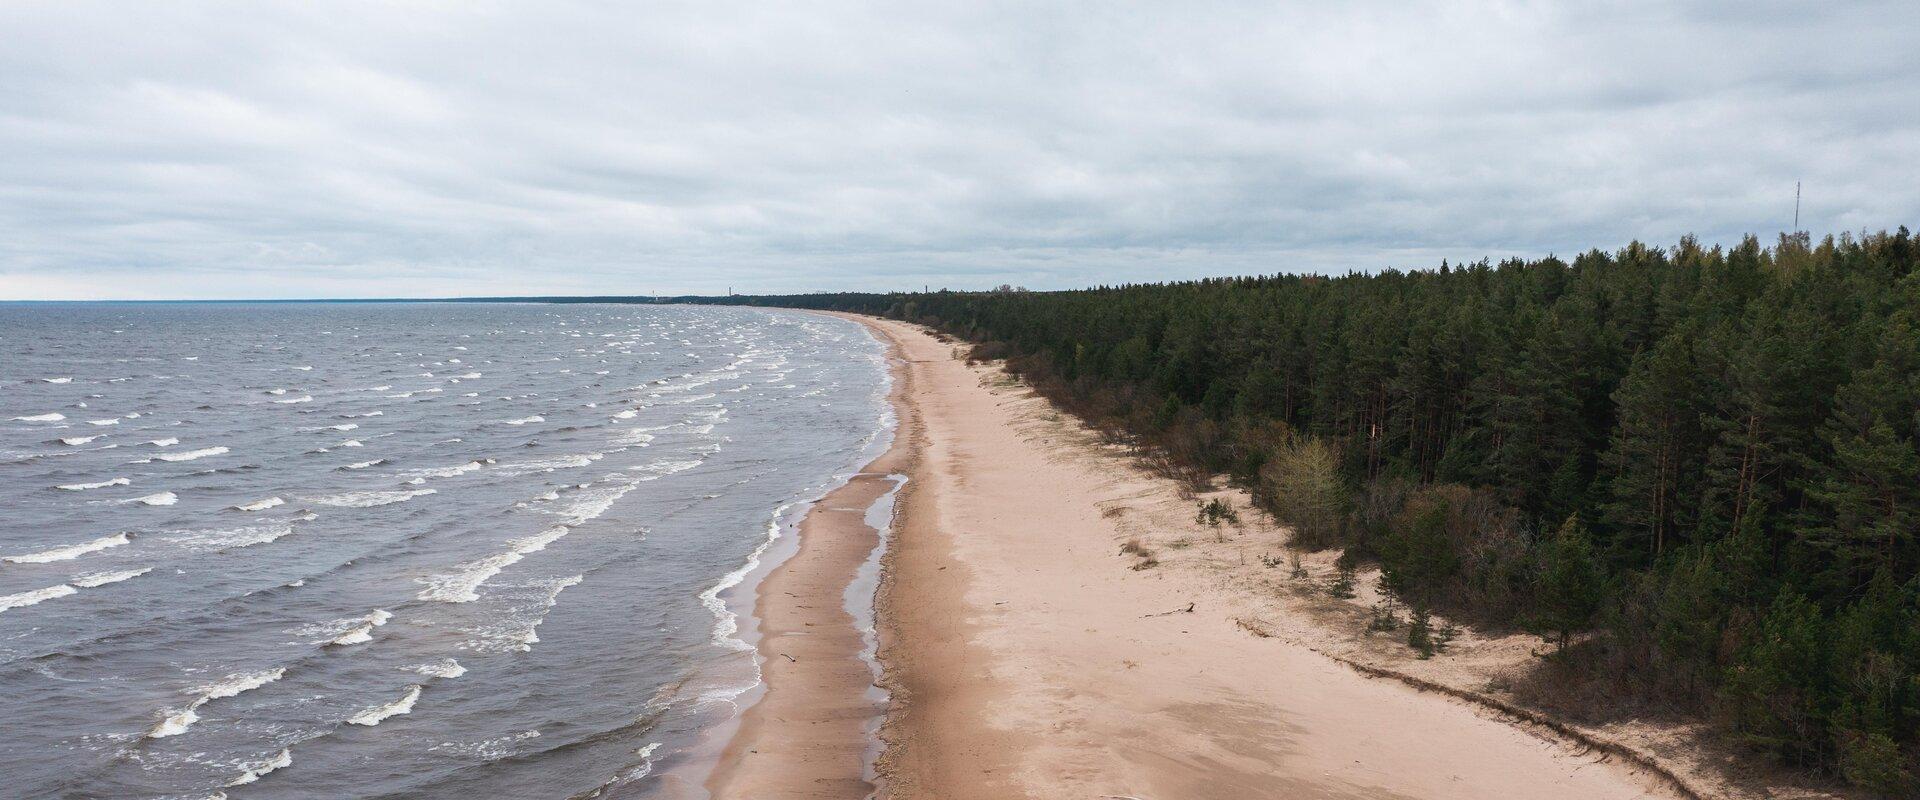 Narva-Jõesuu beach is covered with fine sand and lined with a pine forest. Its also well-known for its unique natural environment and is the longest b